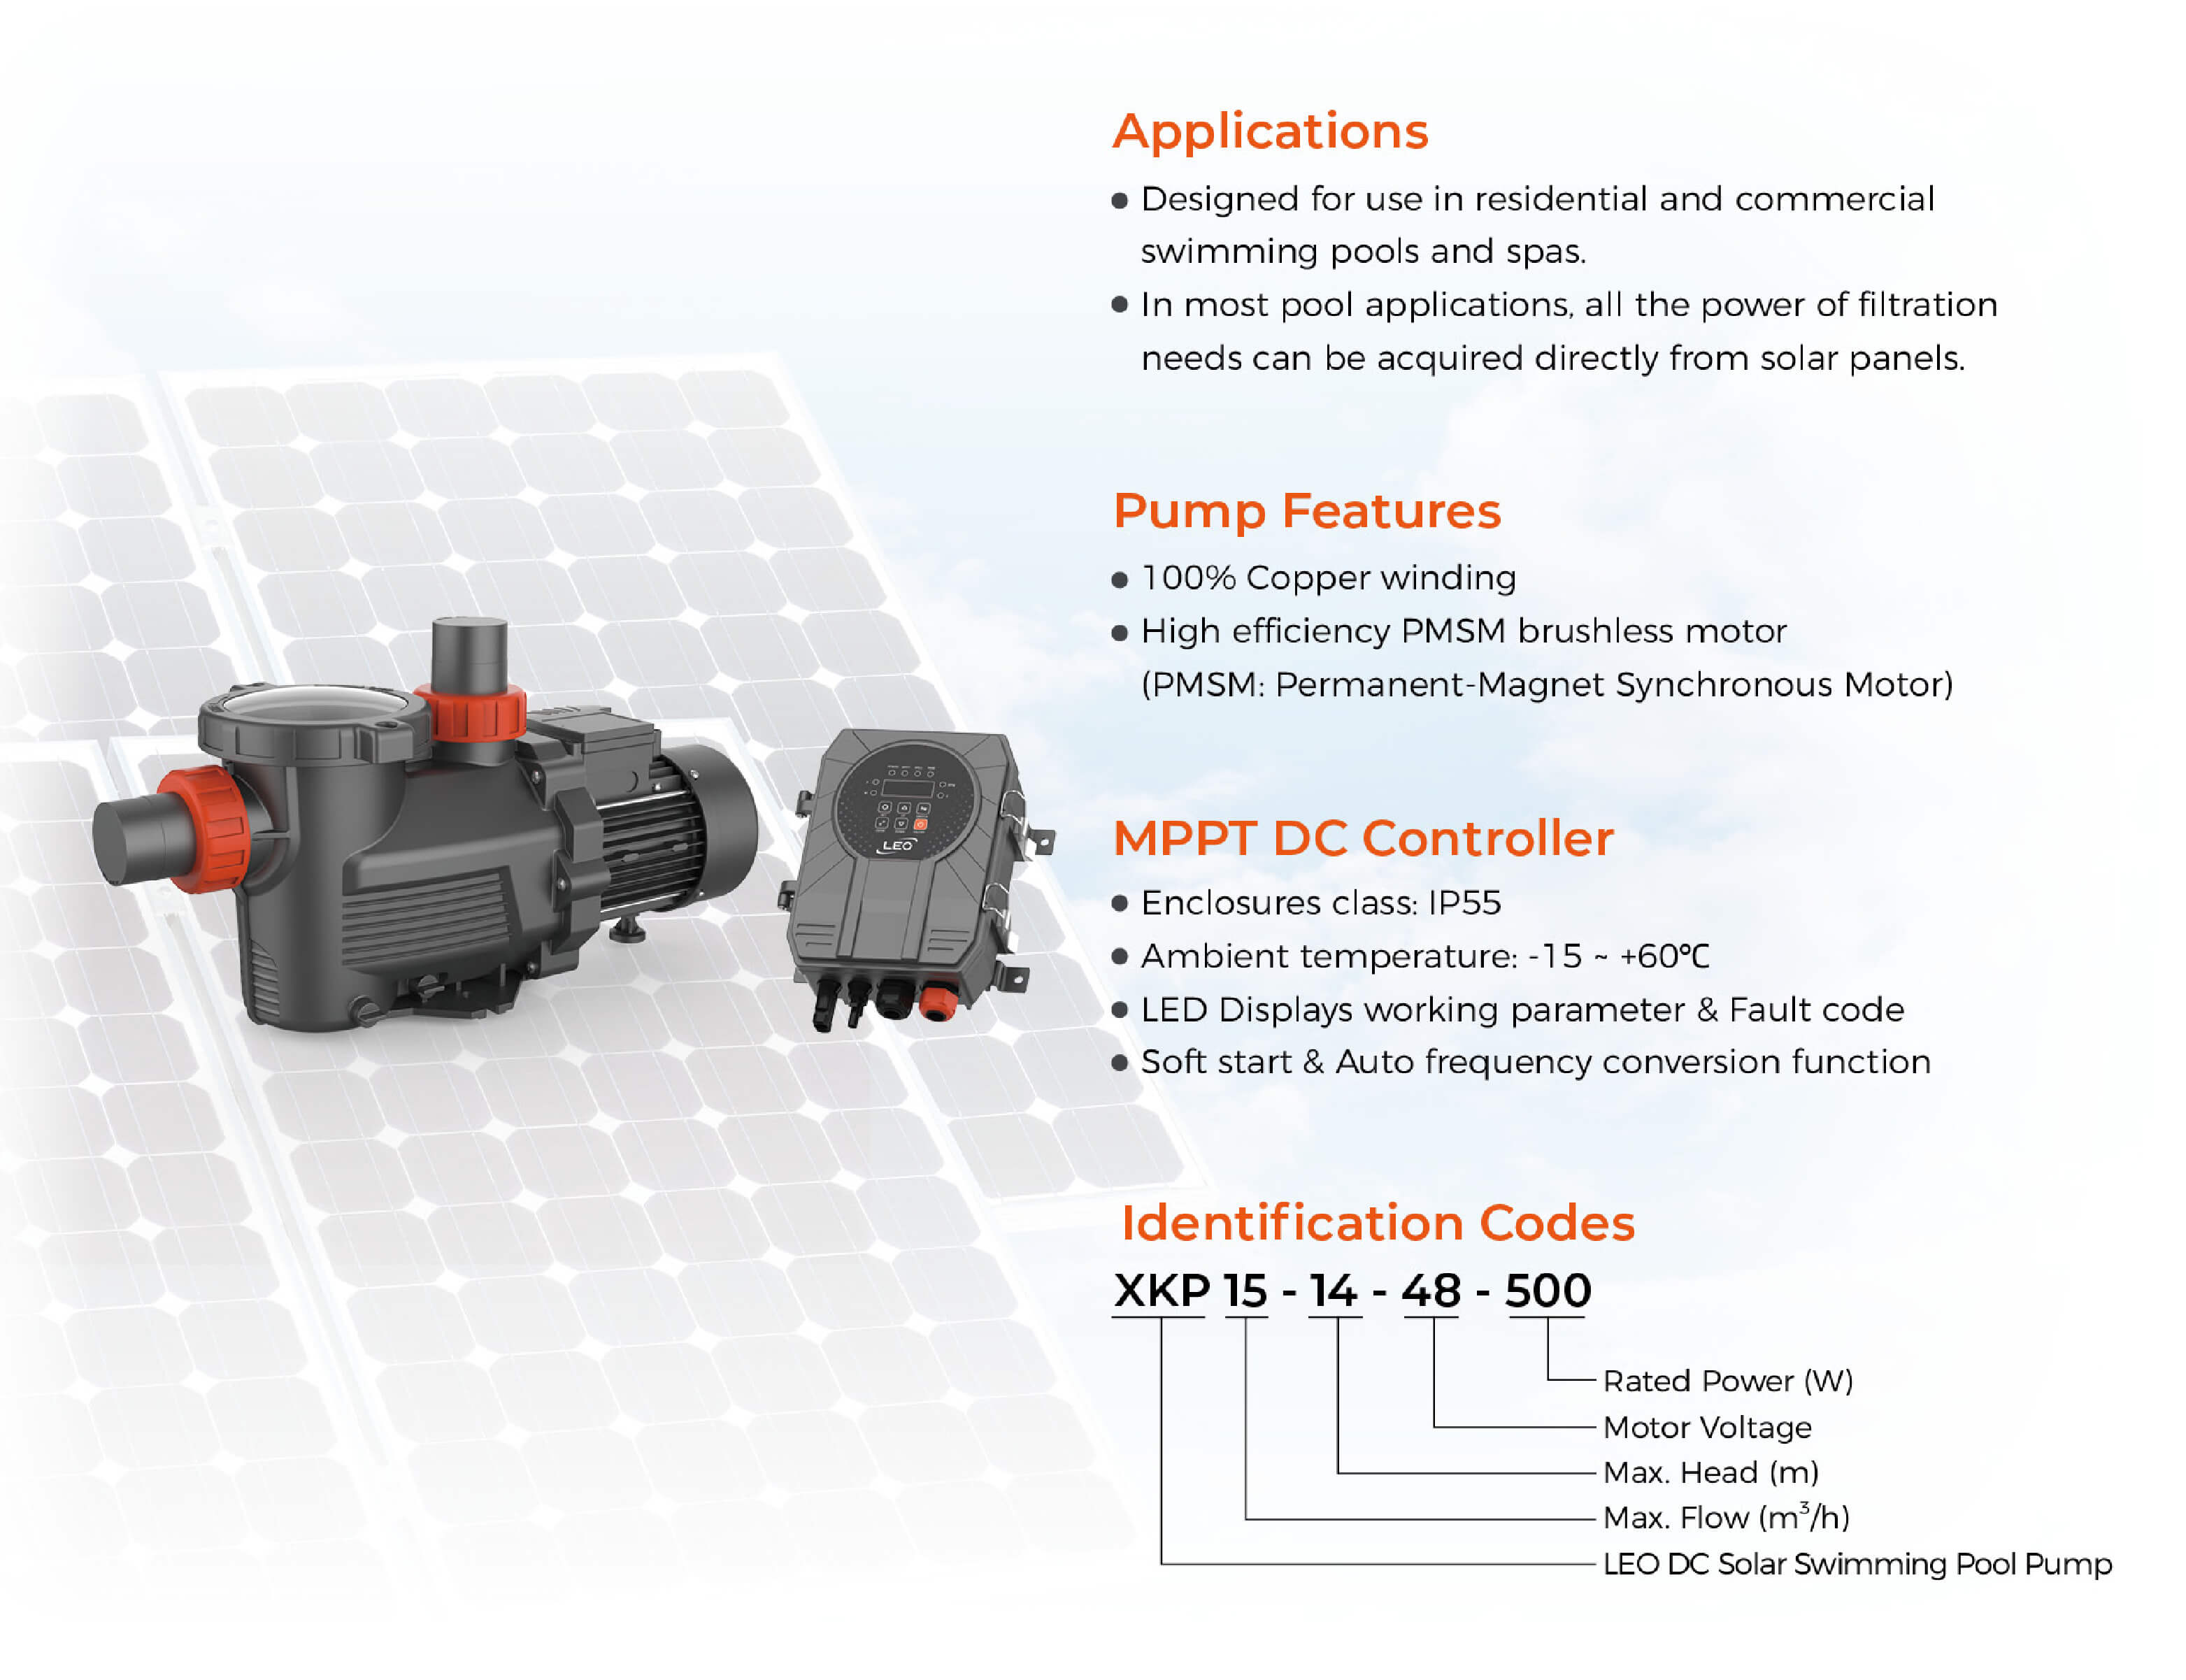 XKP DC Solar Swimming Pool Pump Features